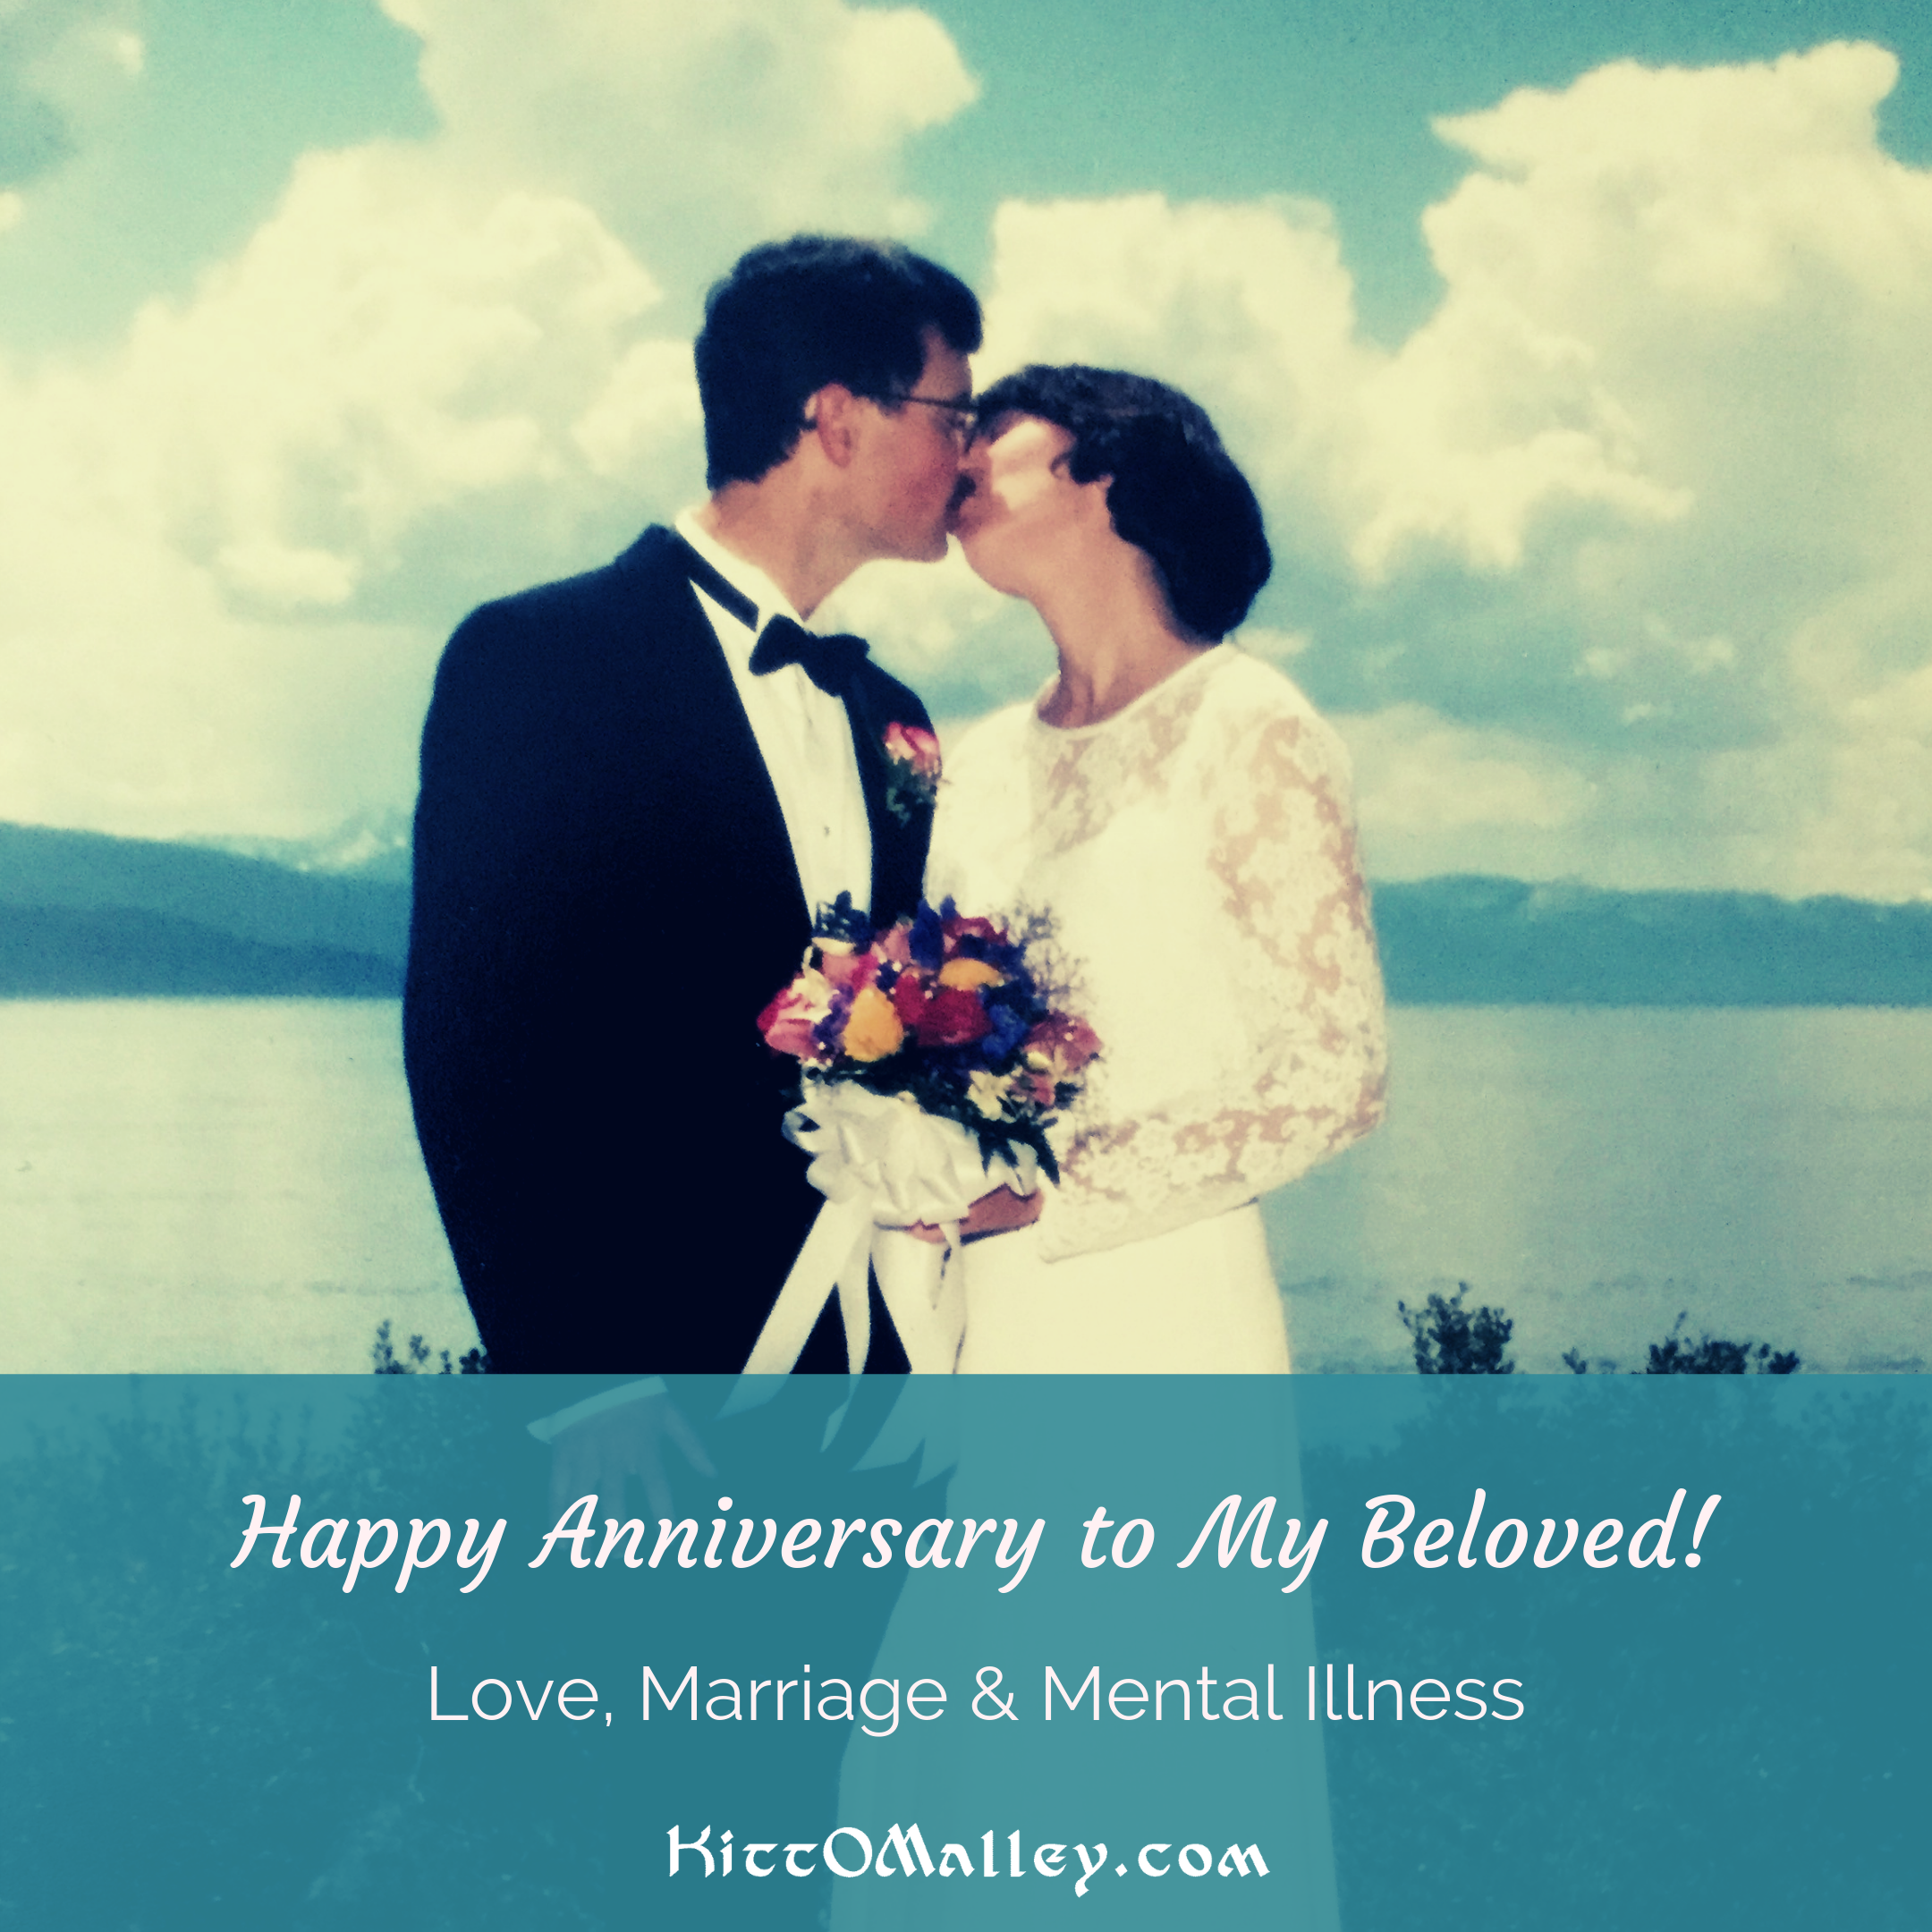 Happy Anniversary to My Beloved! Love, Marriage & Mental Illness. KittOMalley.com